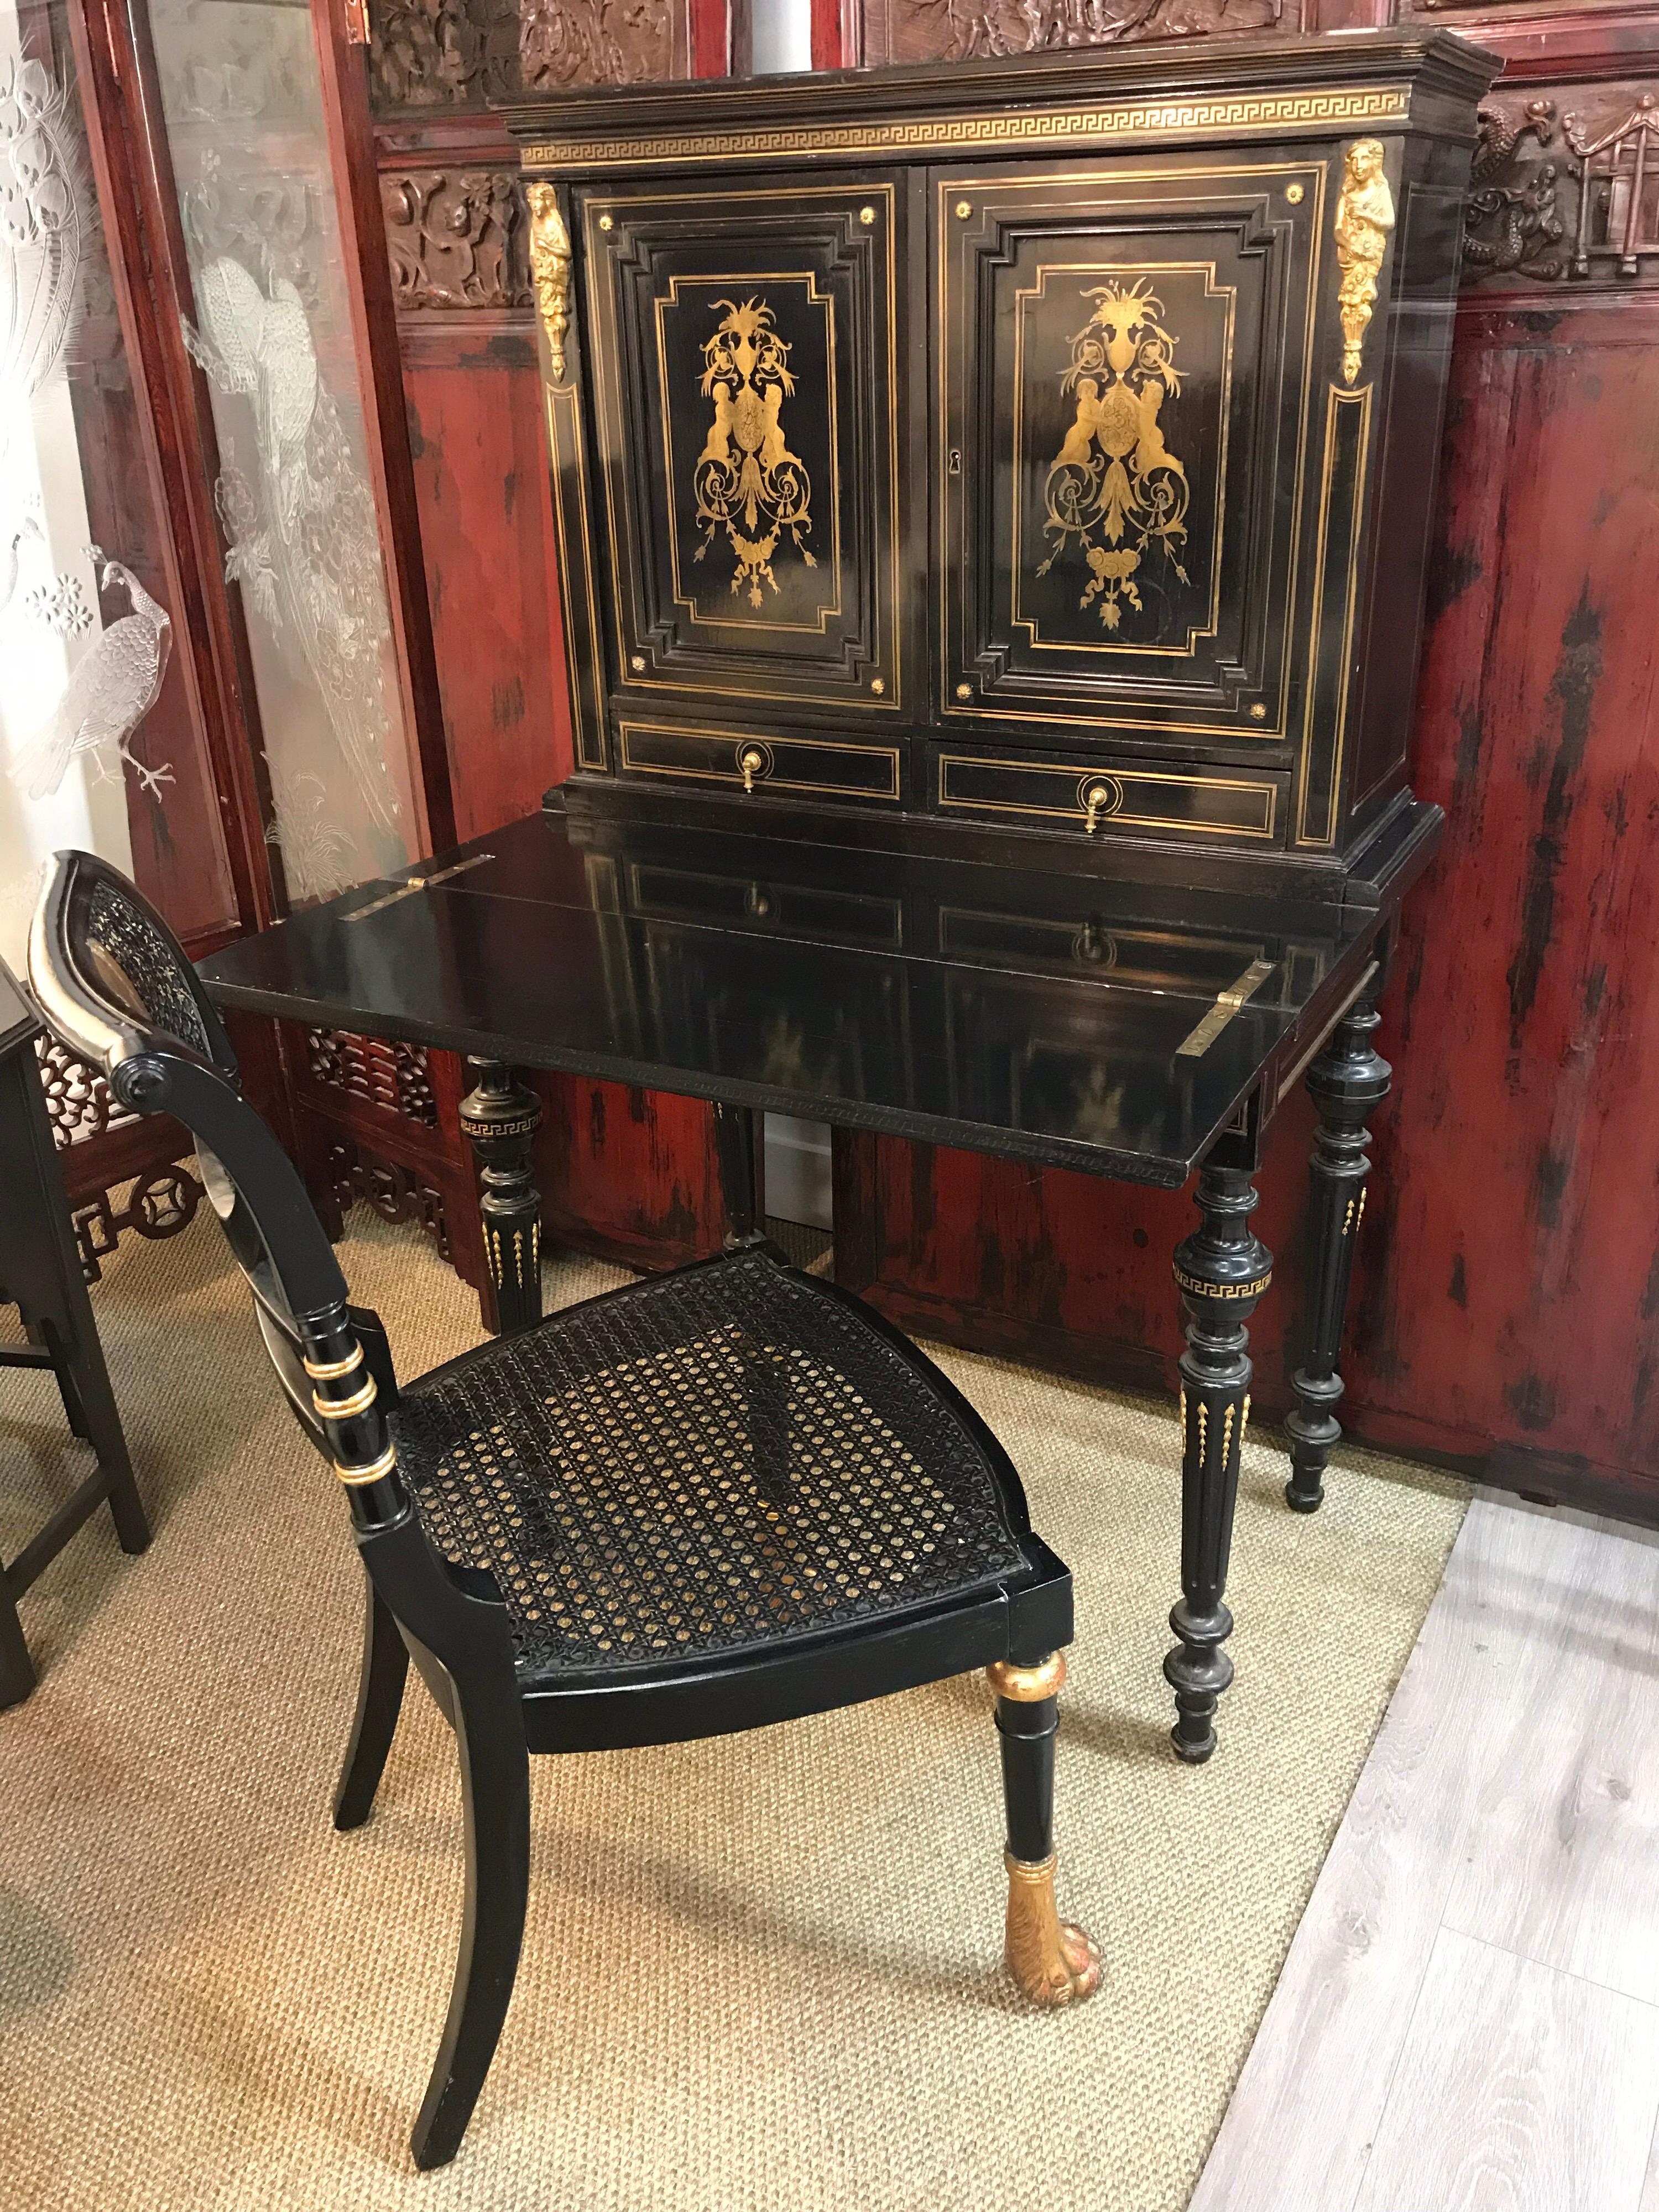 Elegant chinoiserie secretary desk with chair. Great scale to the desk, not too big and will fit
in an apartment setting also.